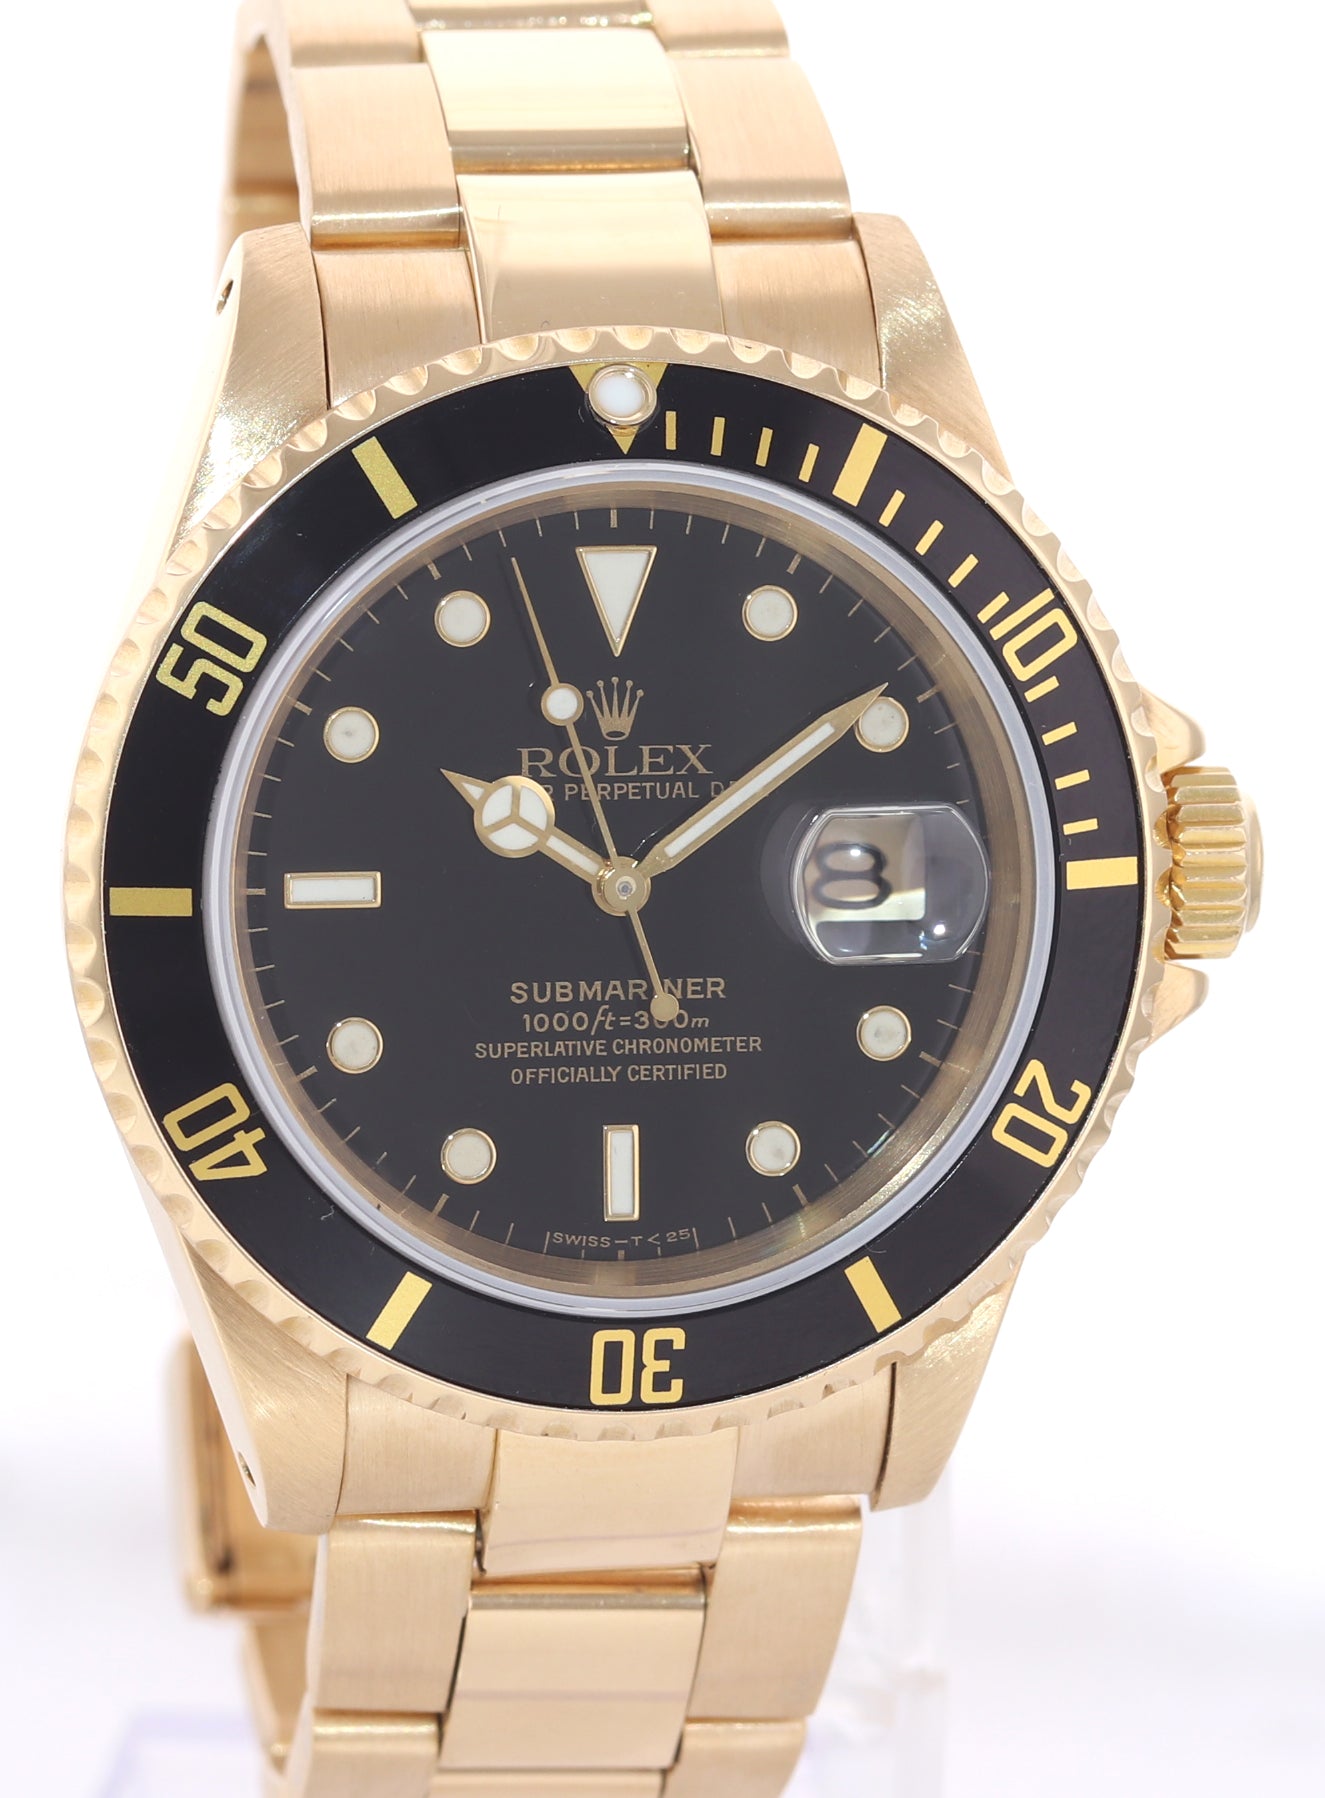 Rolex Submariner Date 16618 18k Yellow Gold Black Dial 40mm Oyster Watch Box